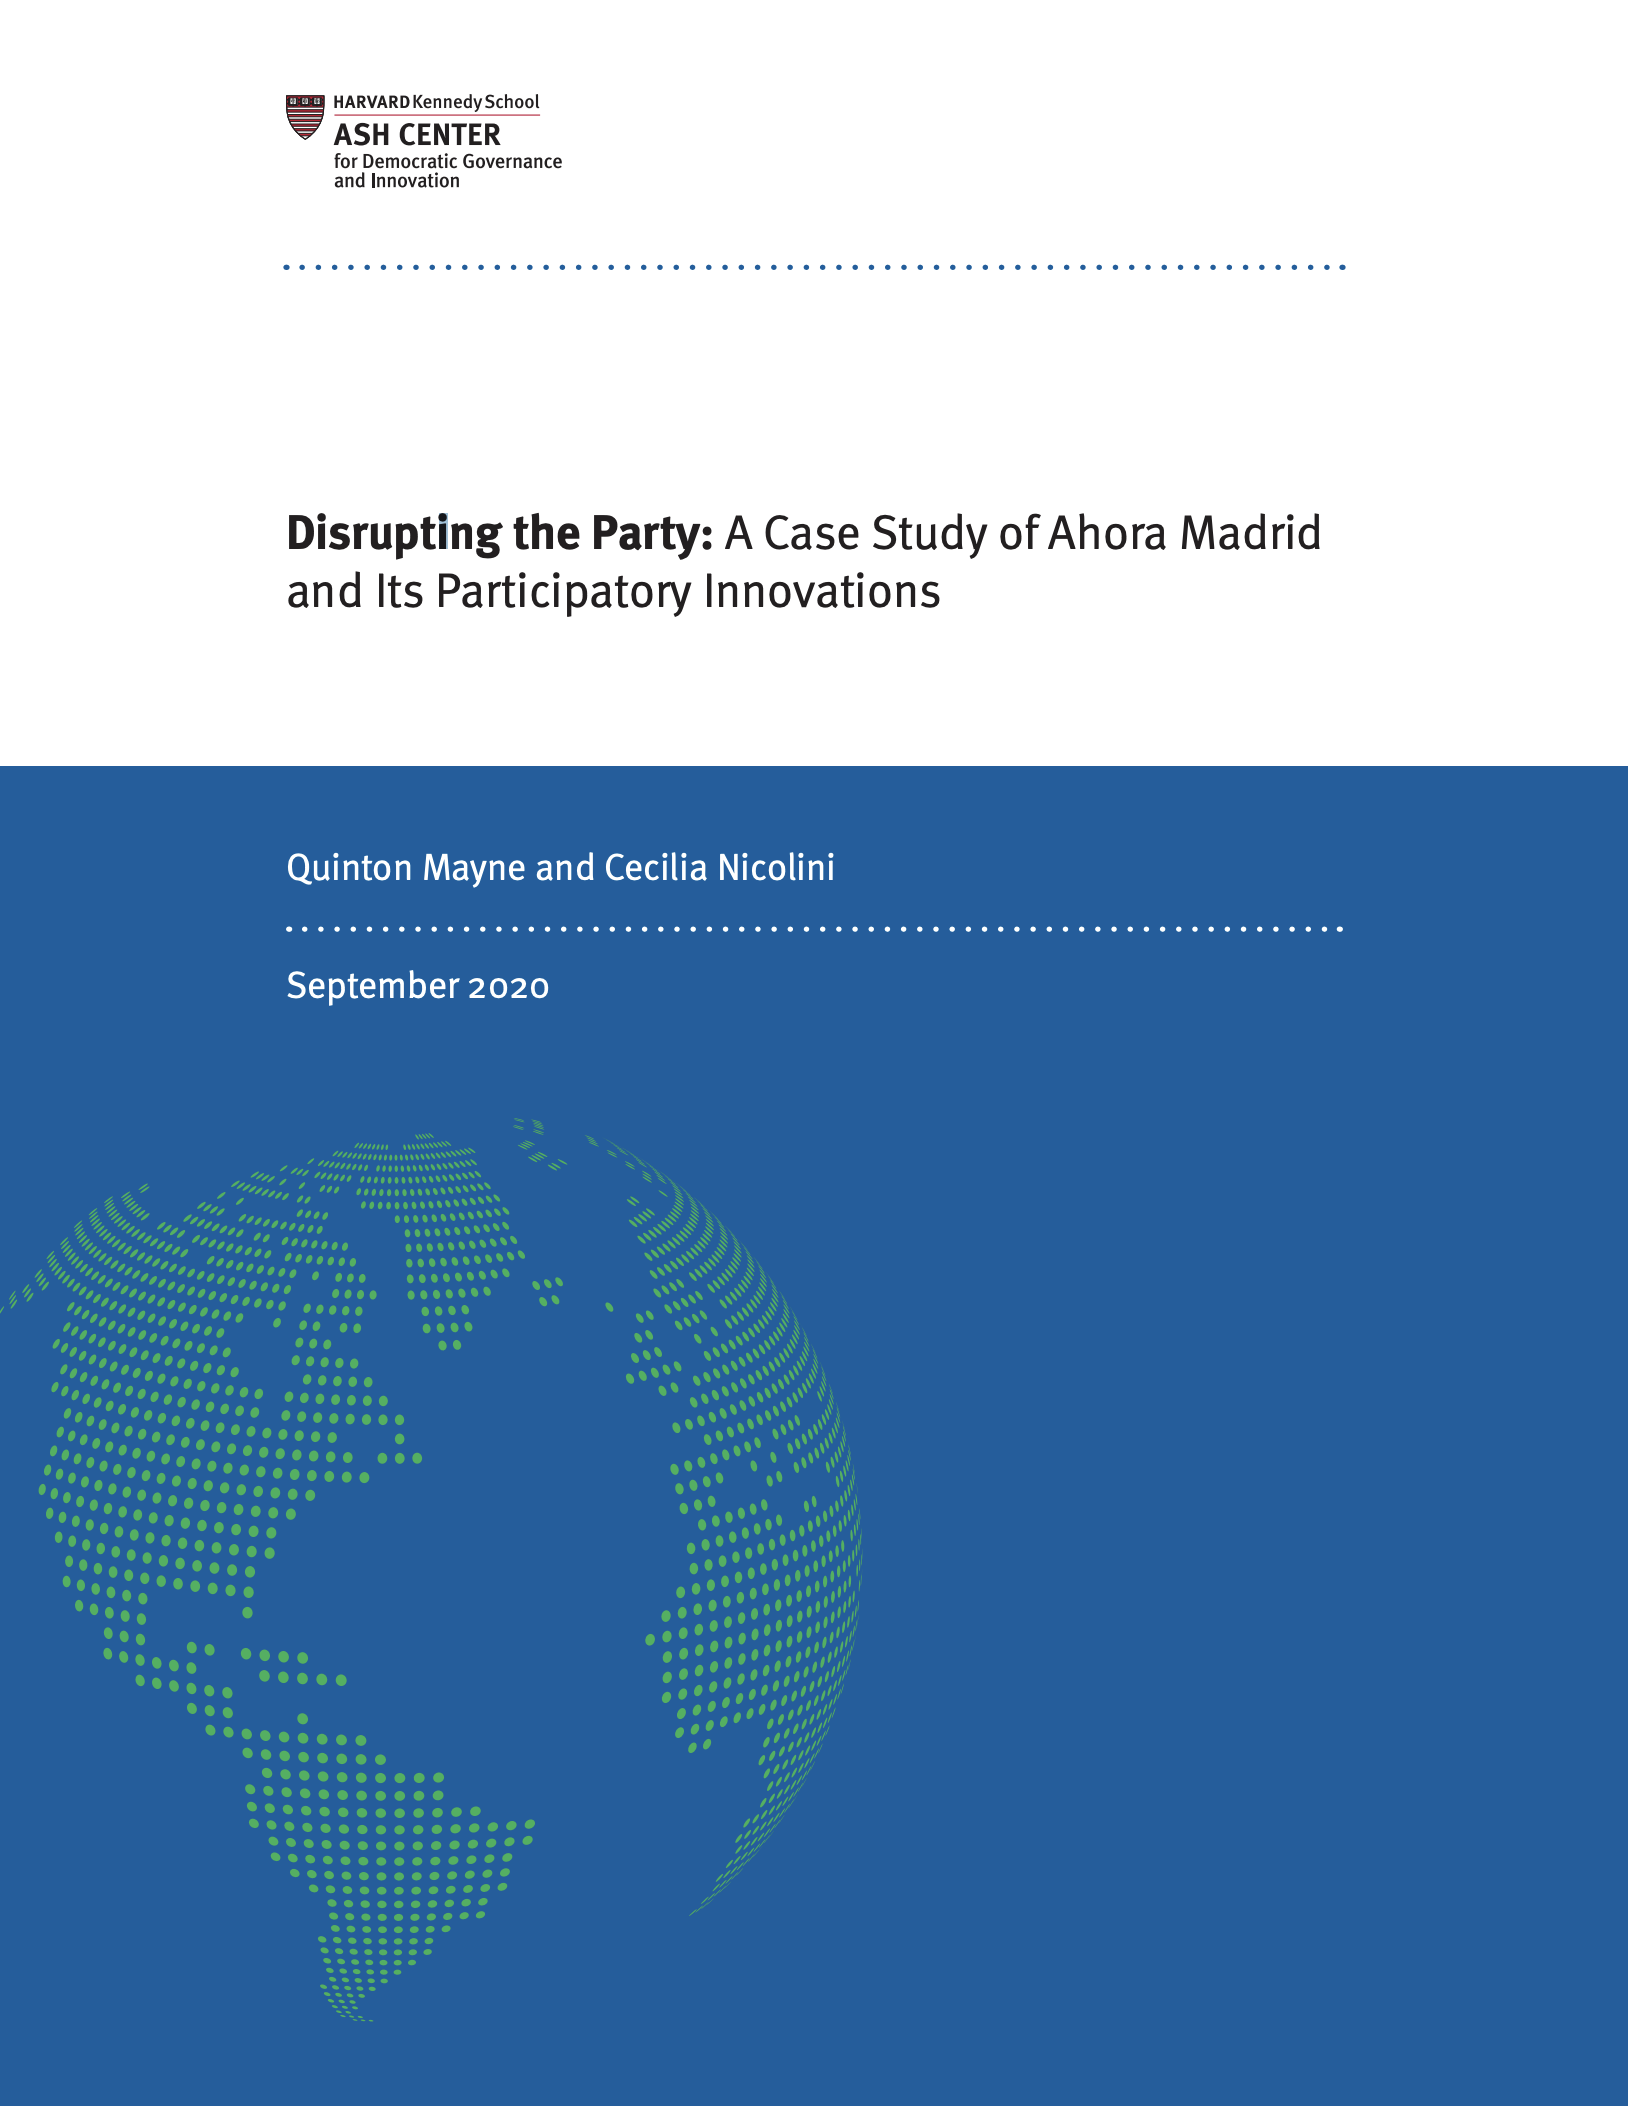 Disrupting the Party: A Case Study of Ahora Madrid and Its Participatory Innovations